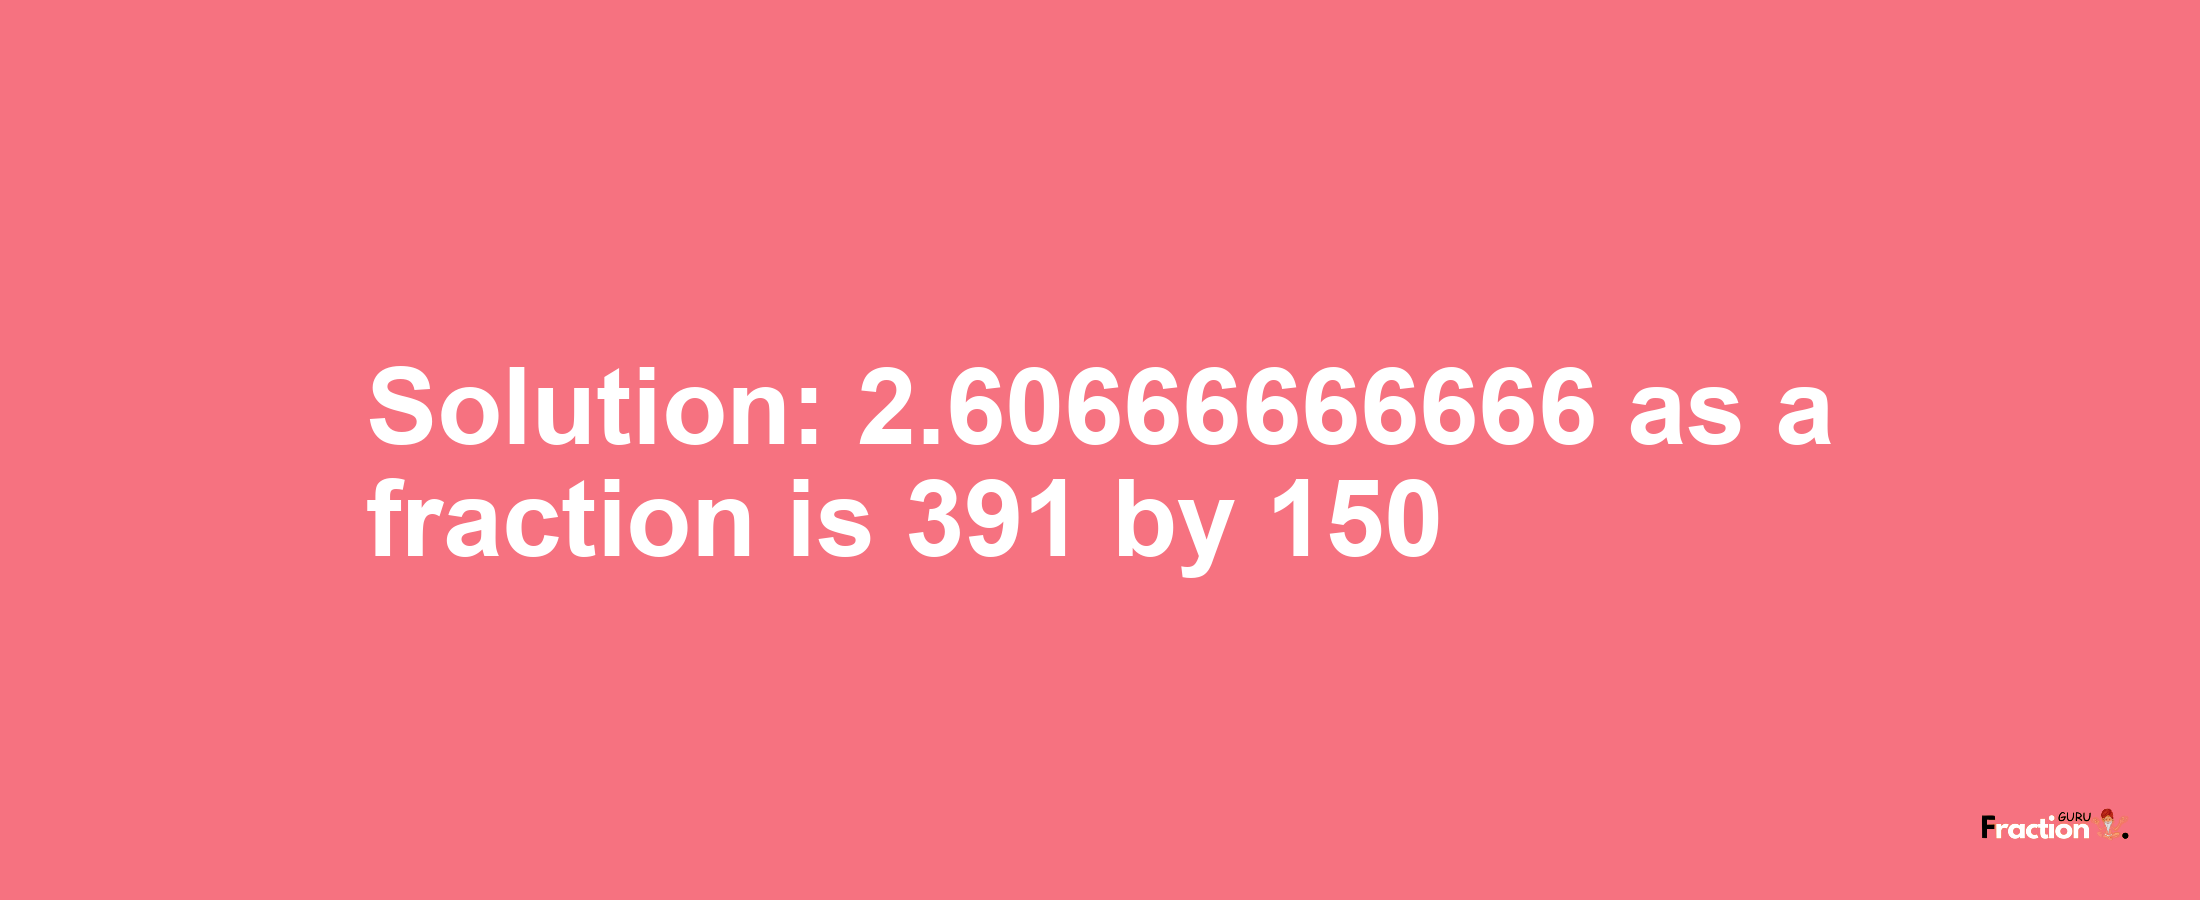 Solution:2.60666666666 as a fraction is 391/150